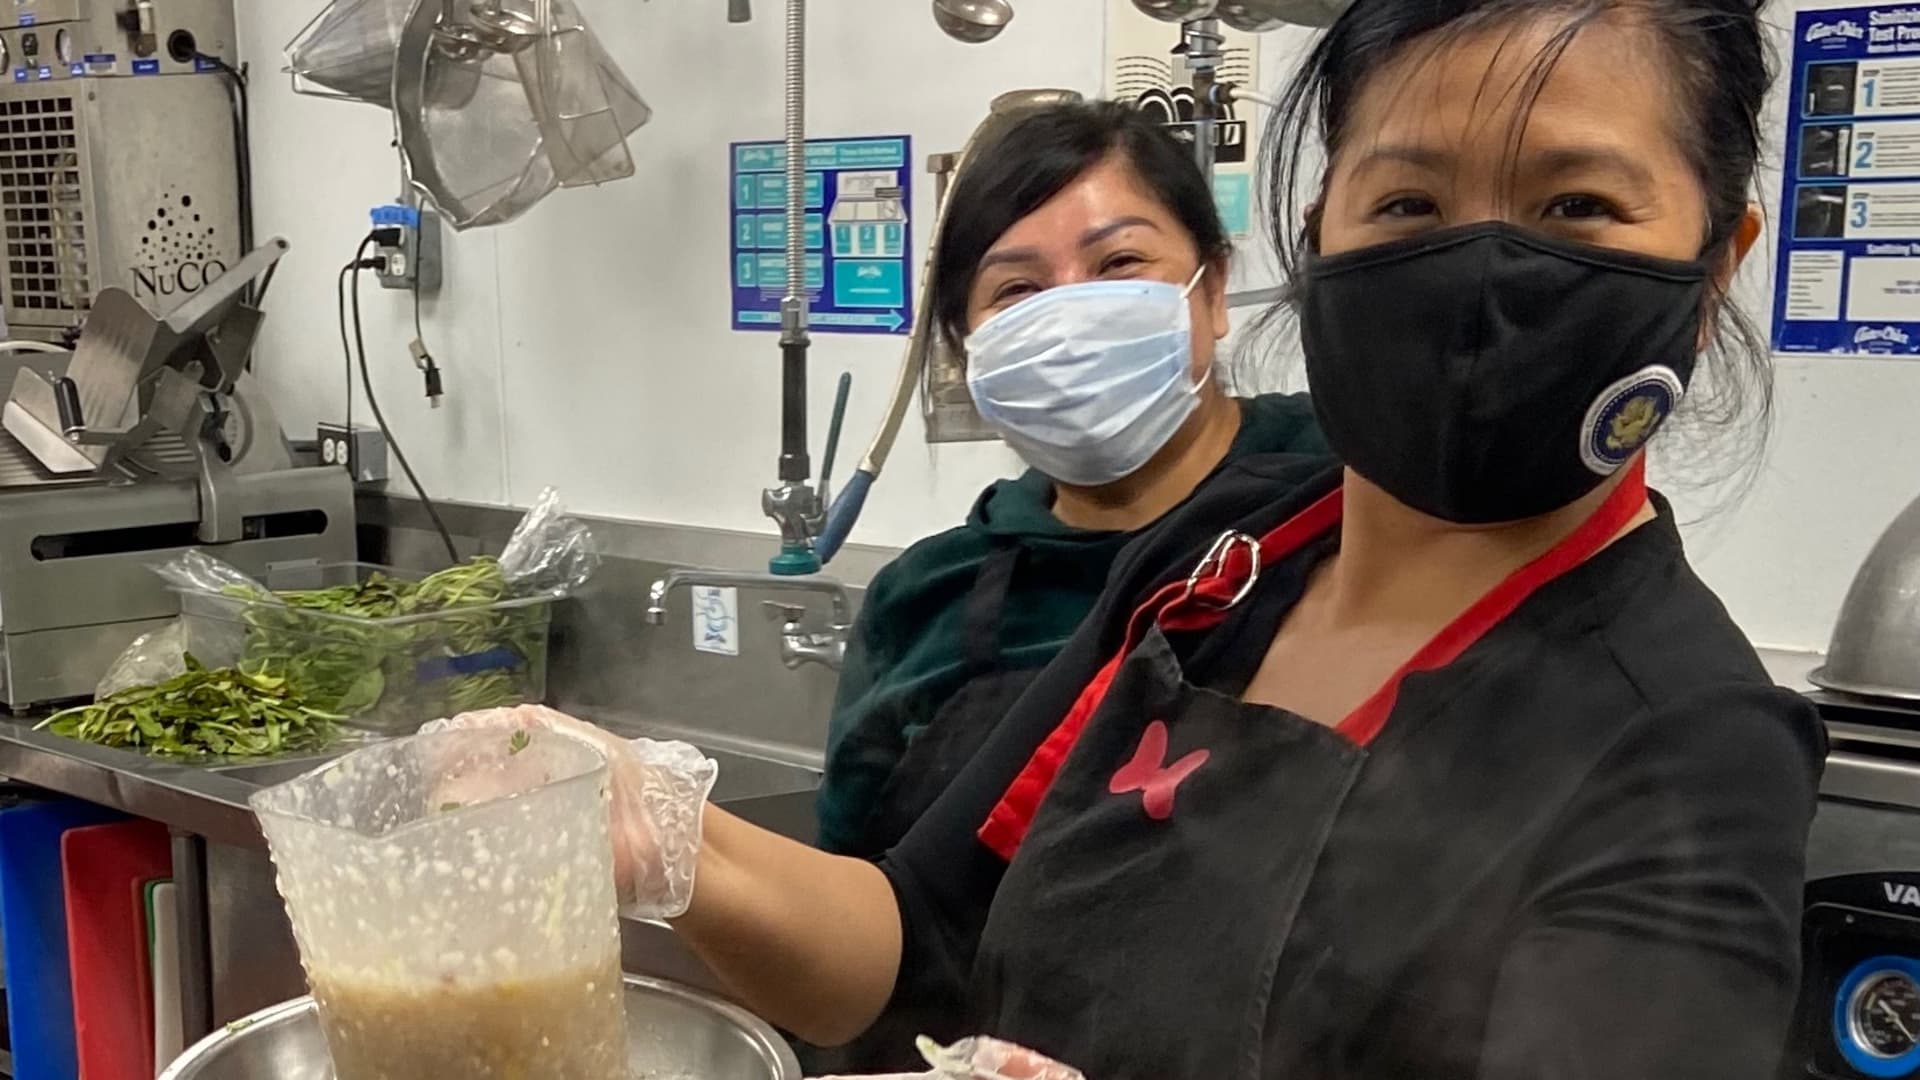 Jan-Ie Low (right) and volunteer Huong Pham pack hot meals to help feed families in need for Operation #MoveForwardTogether in Fountain Valley, California on Feb. 21, 2021.